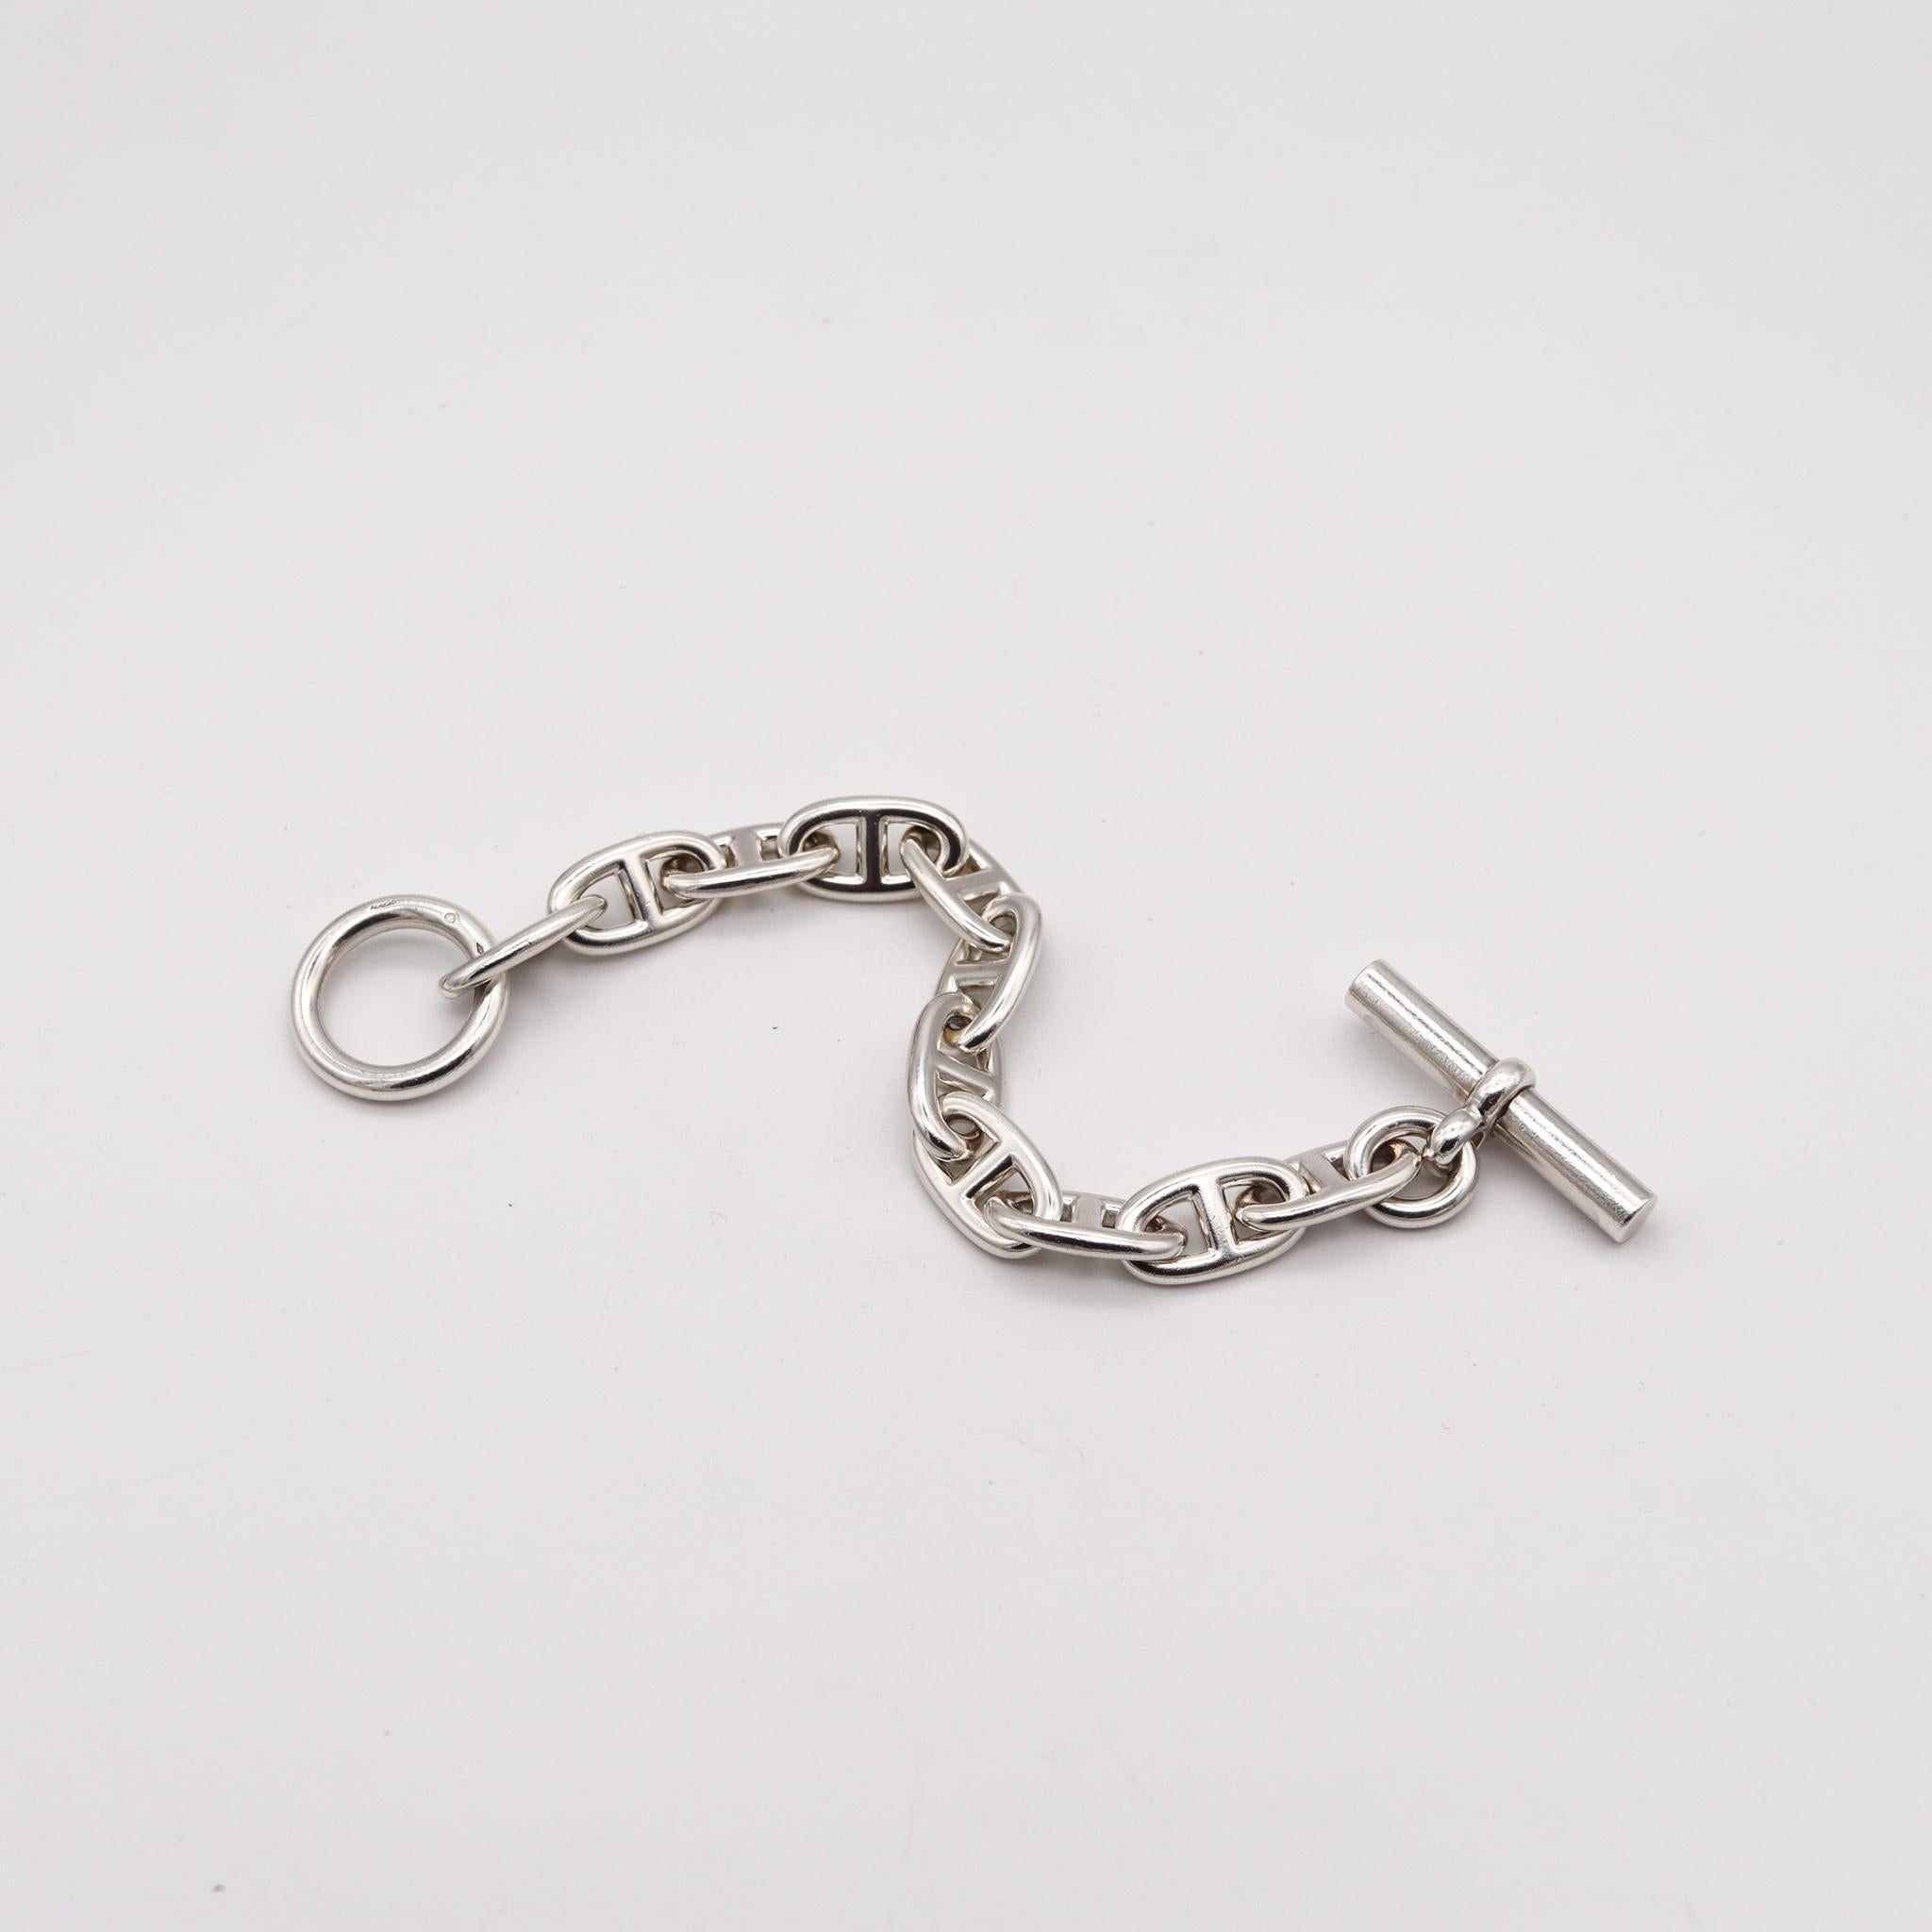 Modernist Hermes Paris Chain D'ancre Links Bracelet in Solid .925 Sterling Silver with Box